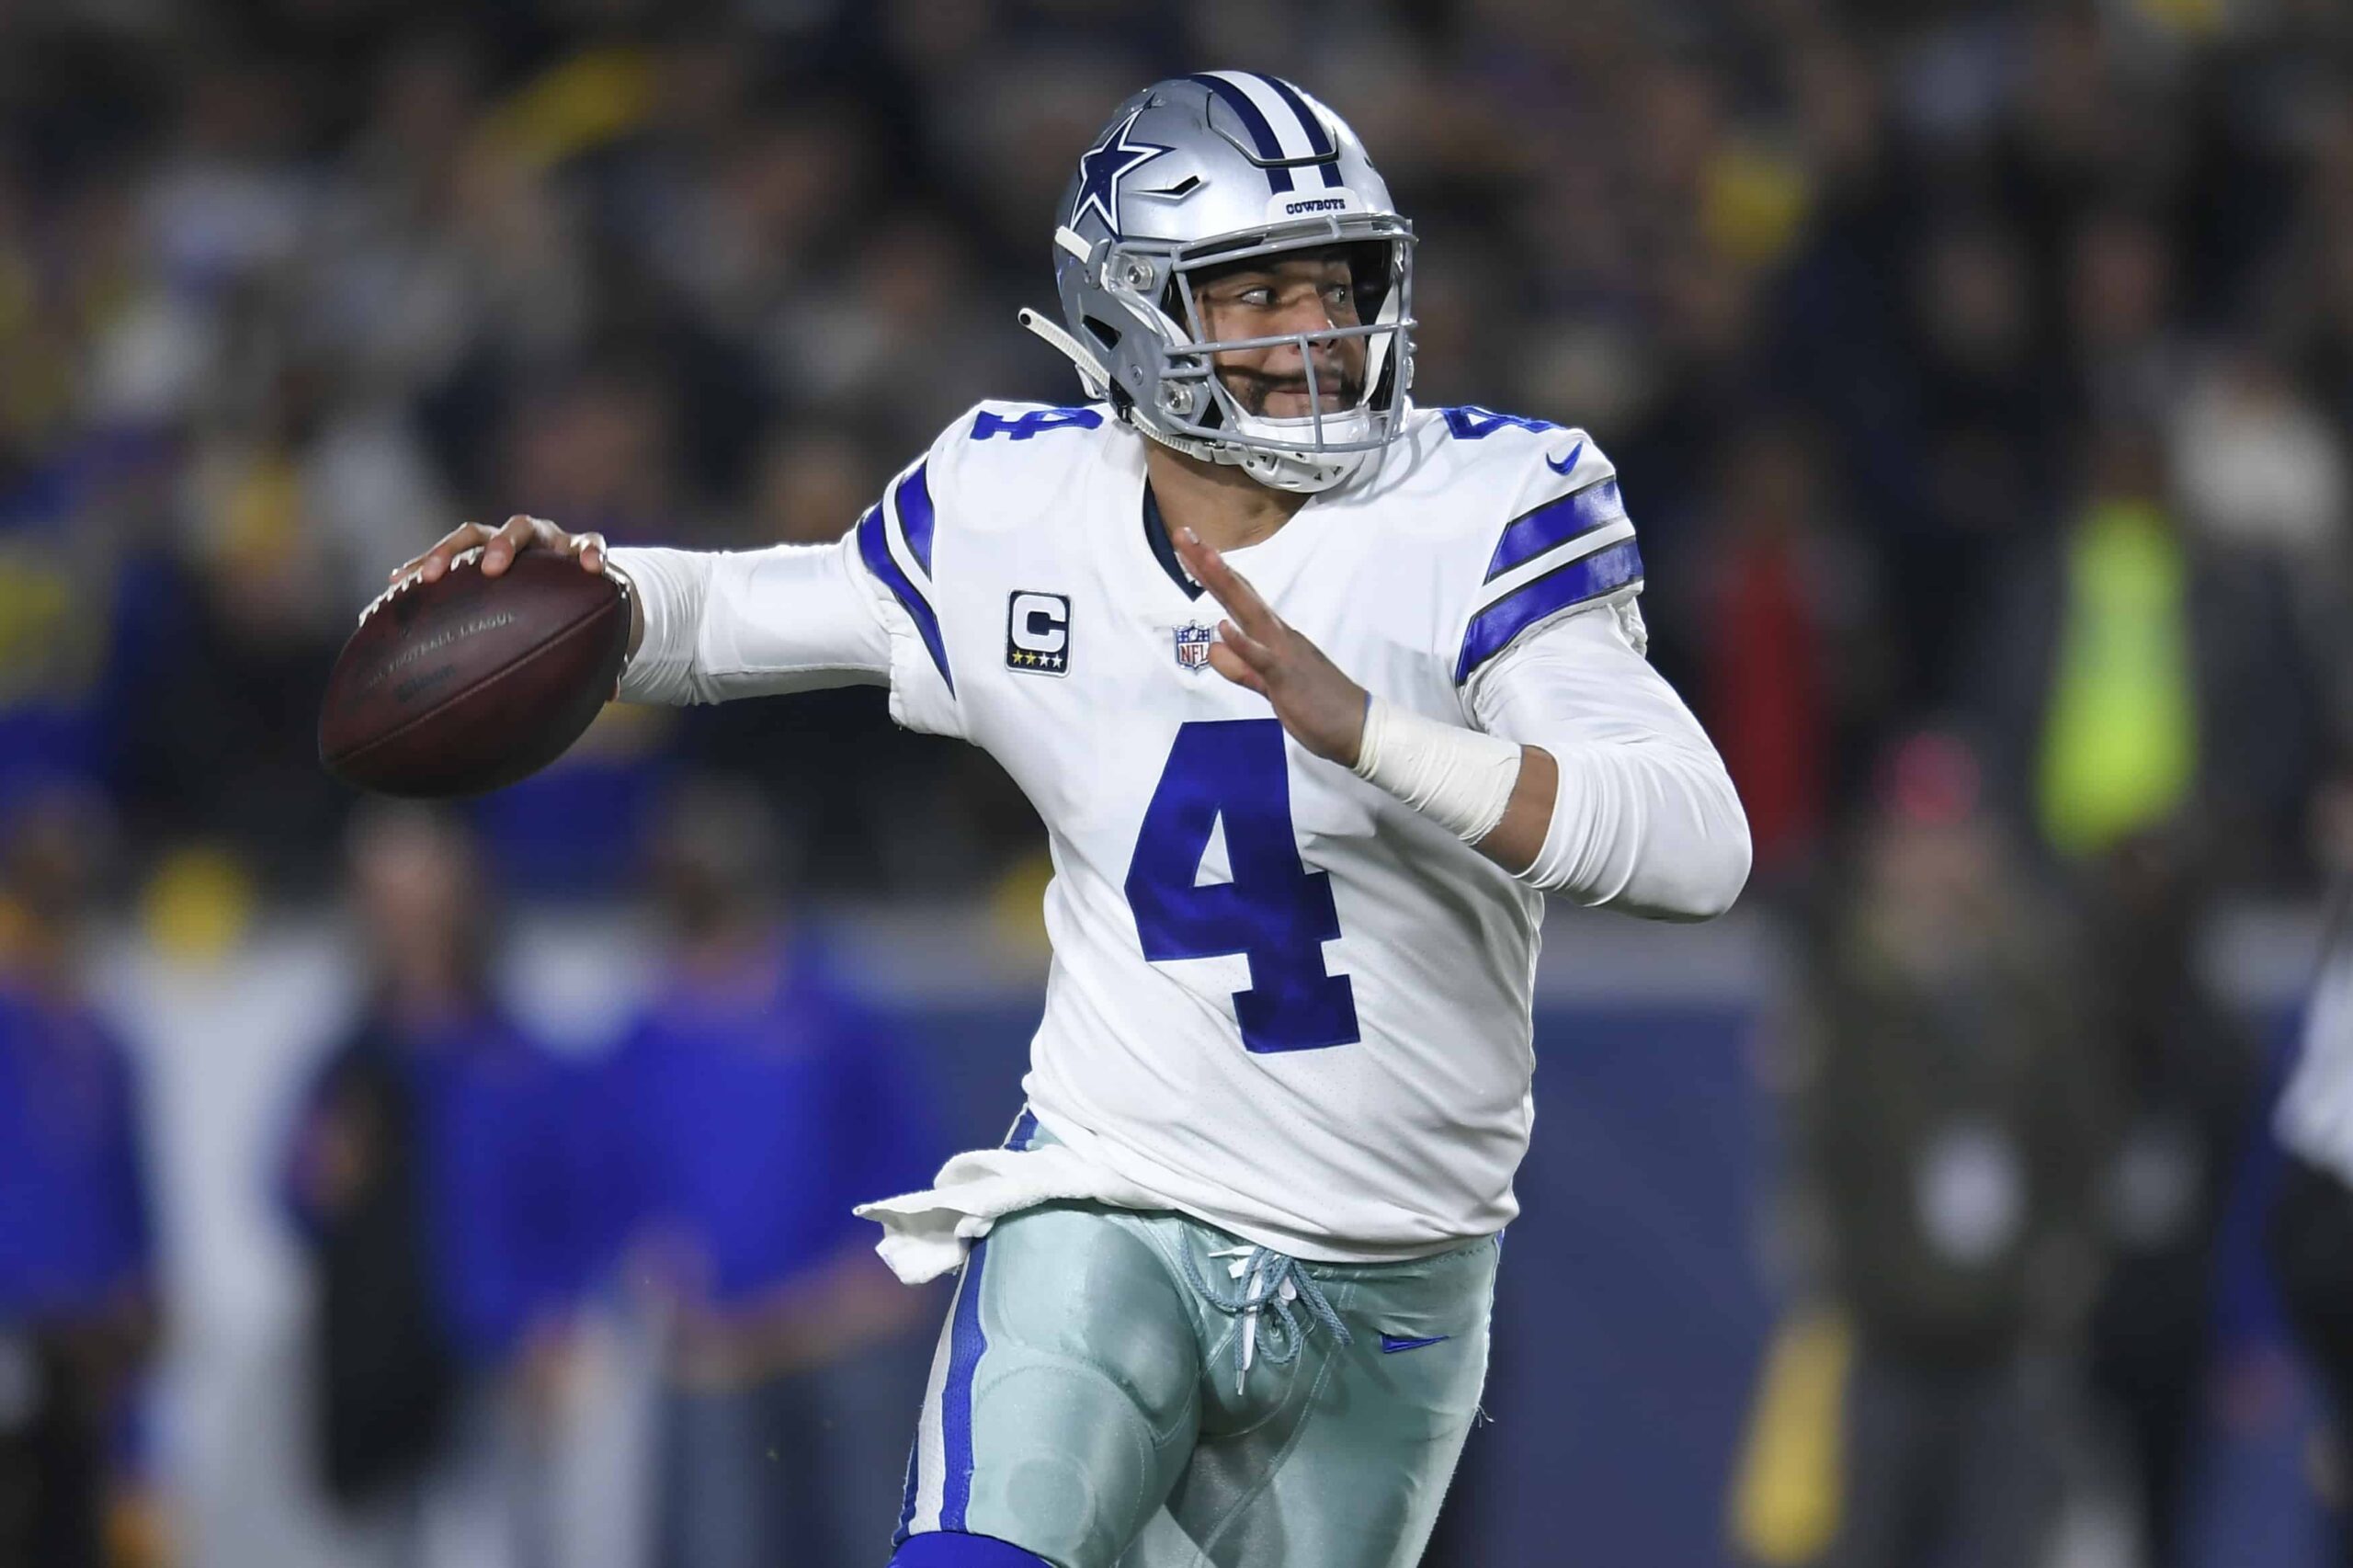 Dak Prescott is Having an Up-and-Down Season — Could it be Time for a Change?